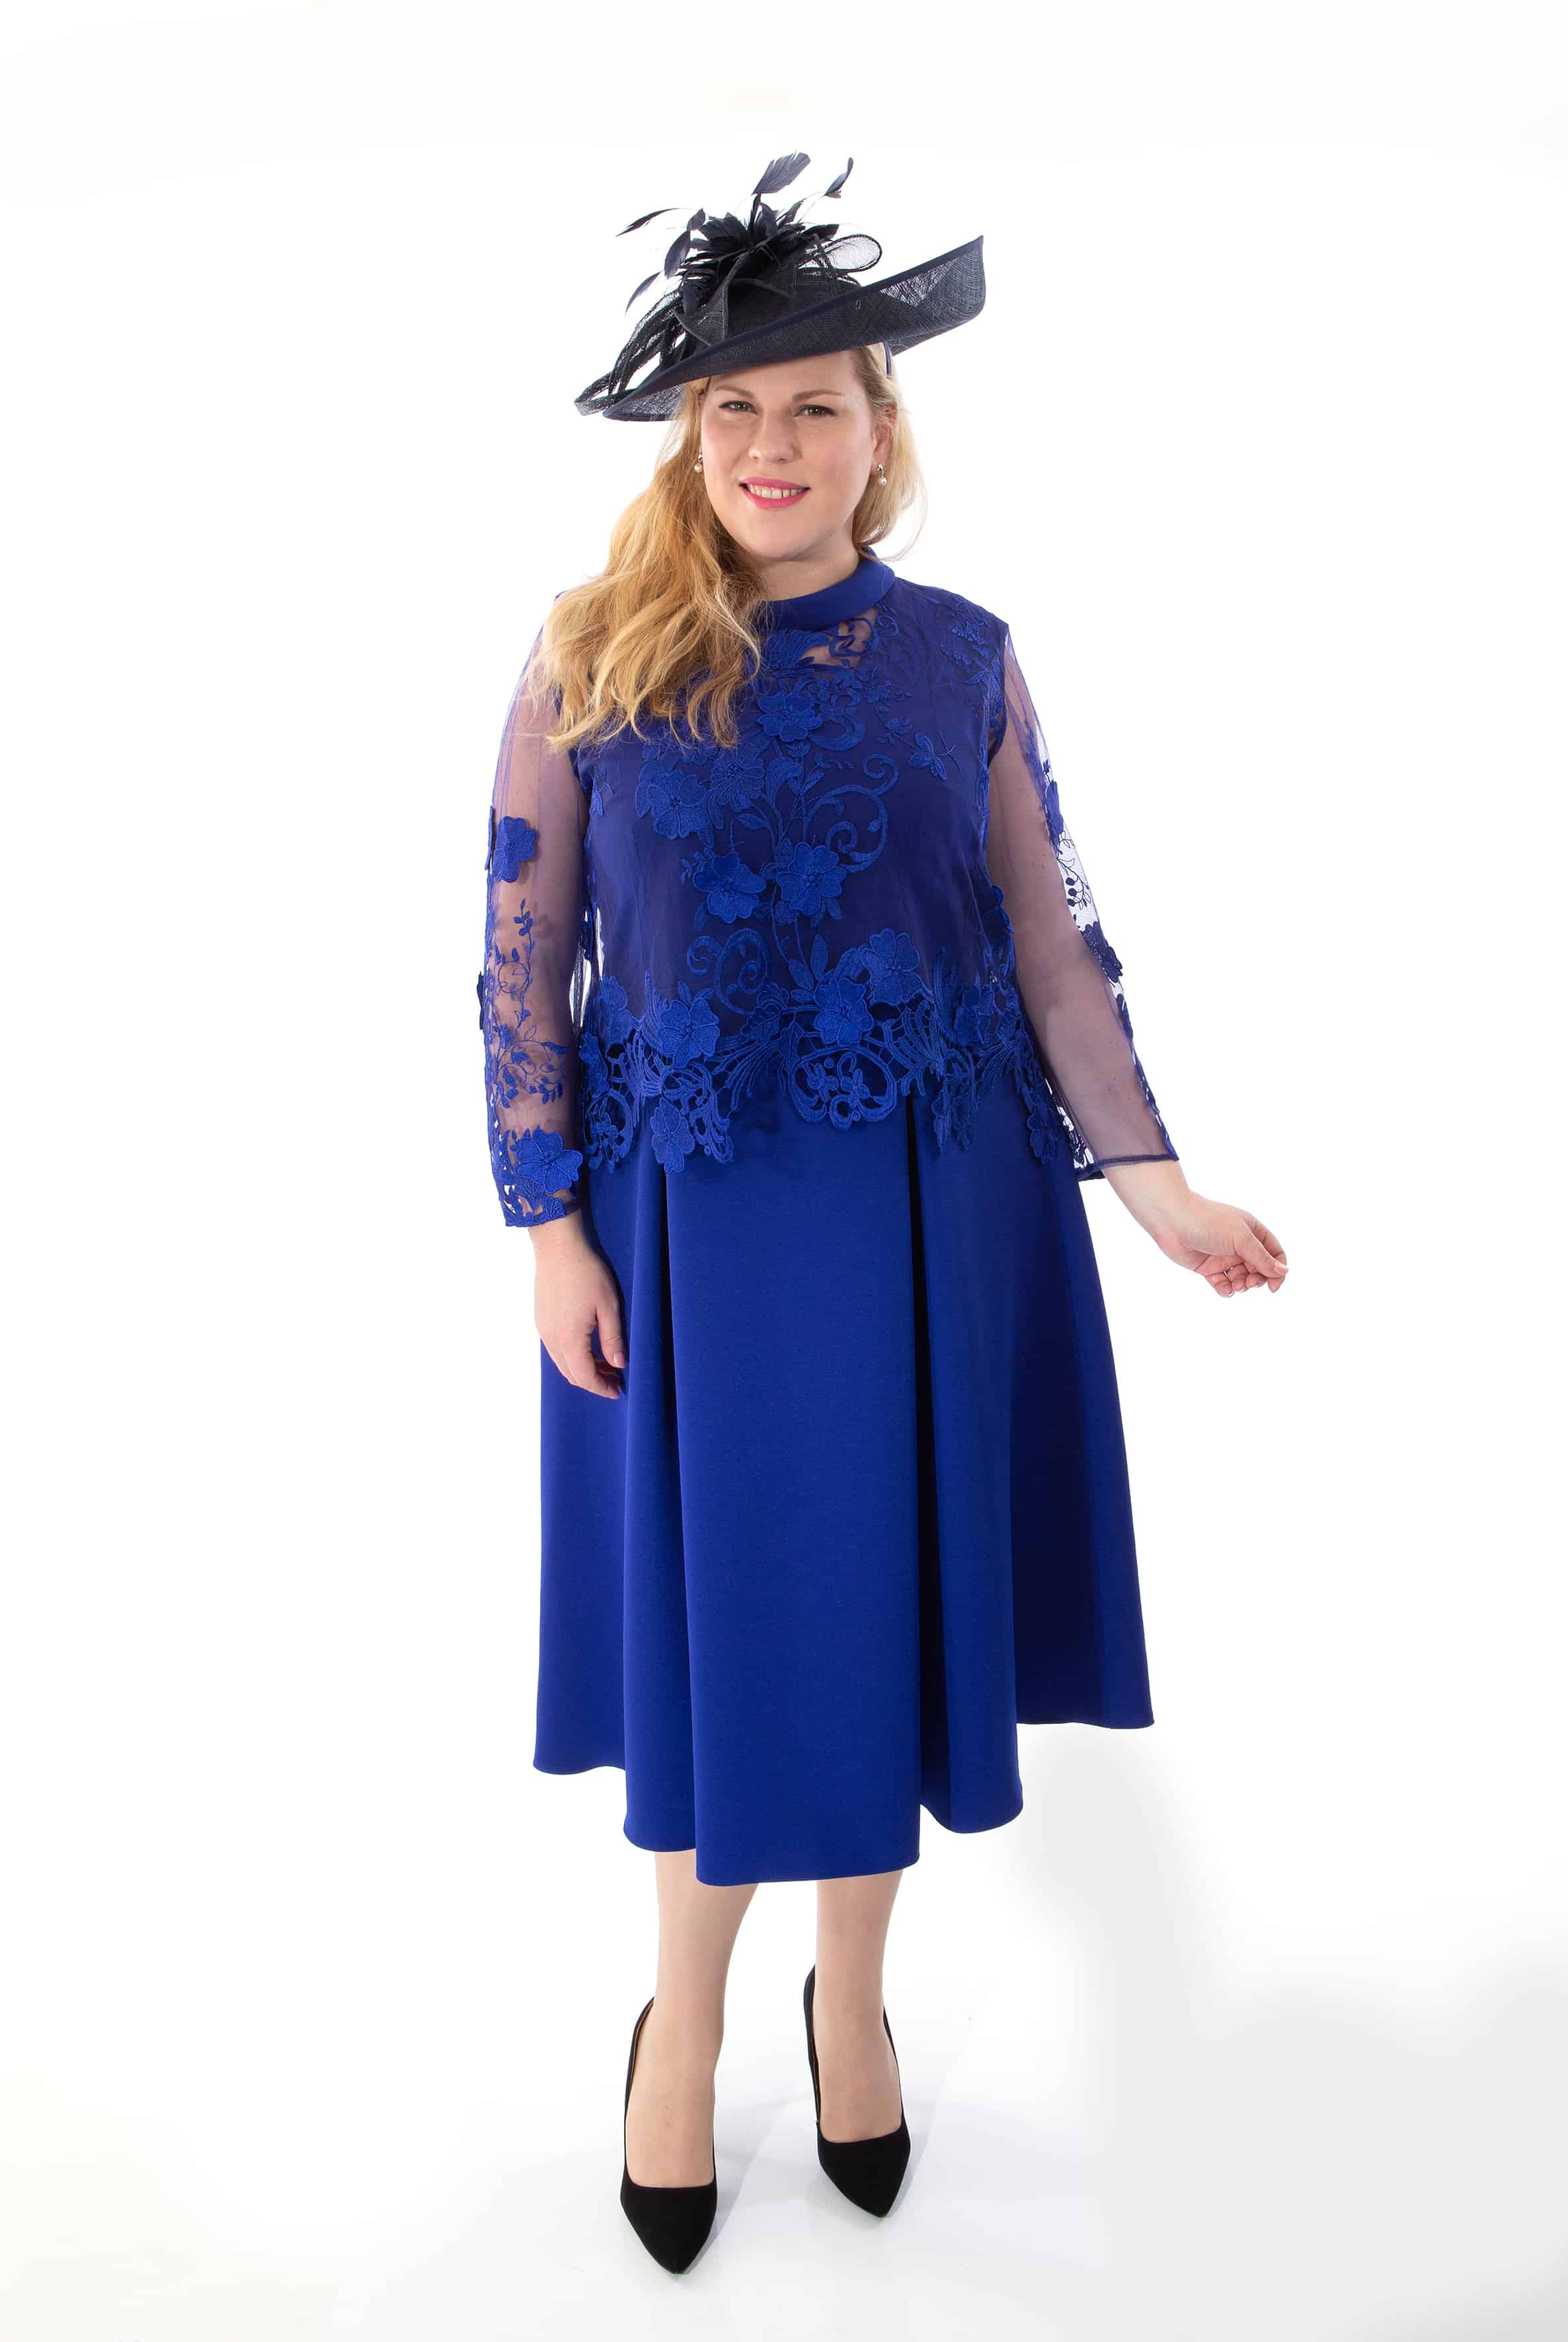 Tea length A-line sleeveless dress with lace backwards buttoning lace detailed jacket. Available in Royal blue, blush and silver (004084)